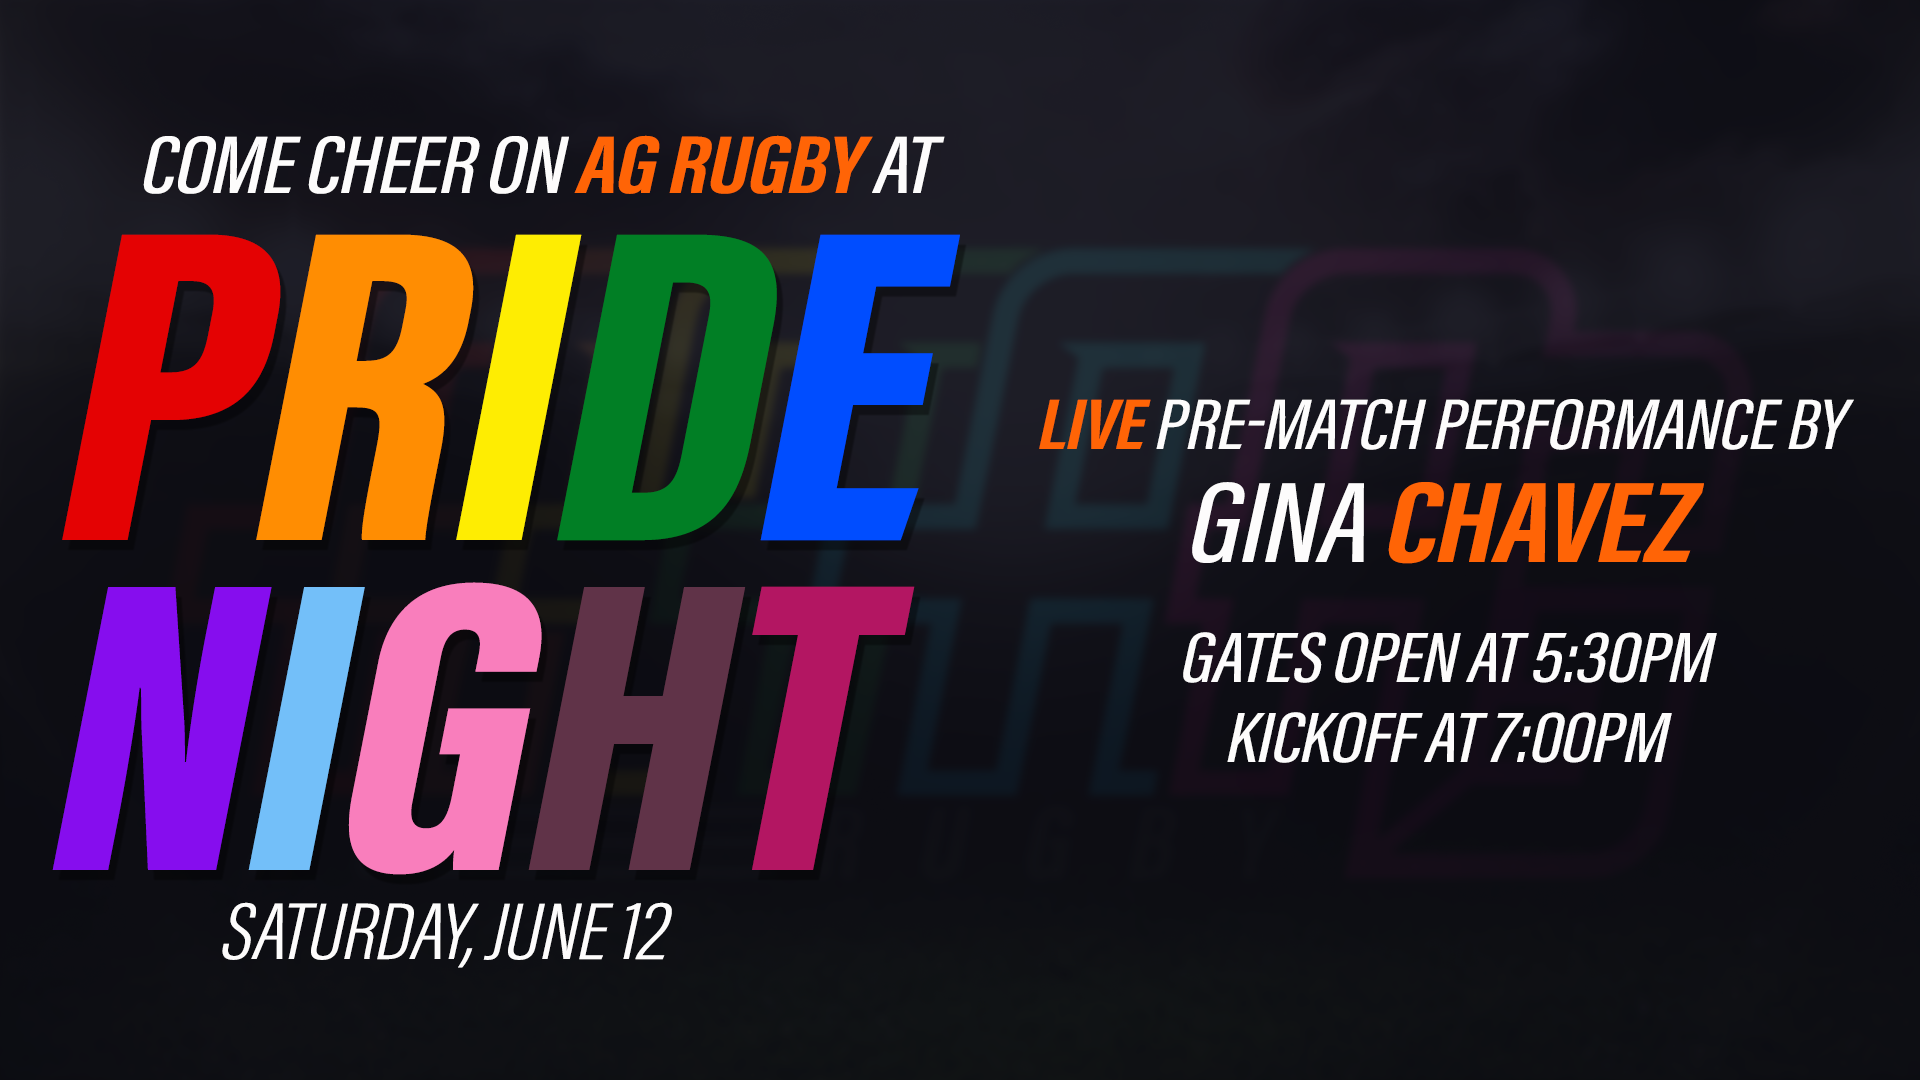 The Final Home Match is PRIDE Night | Saturday June 12th